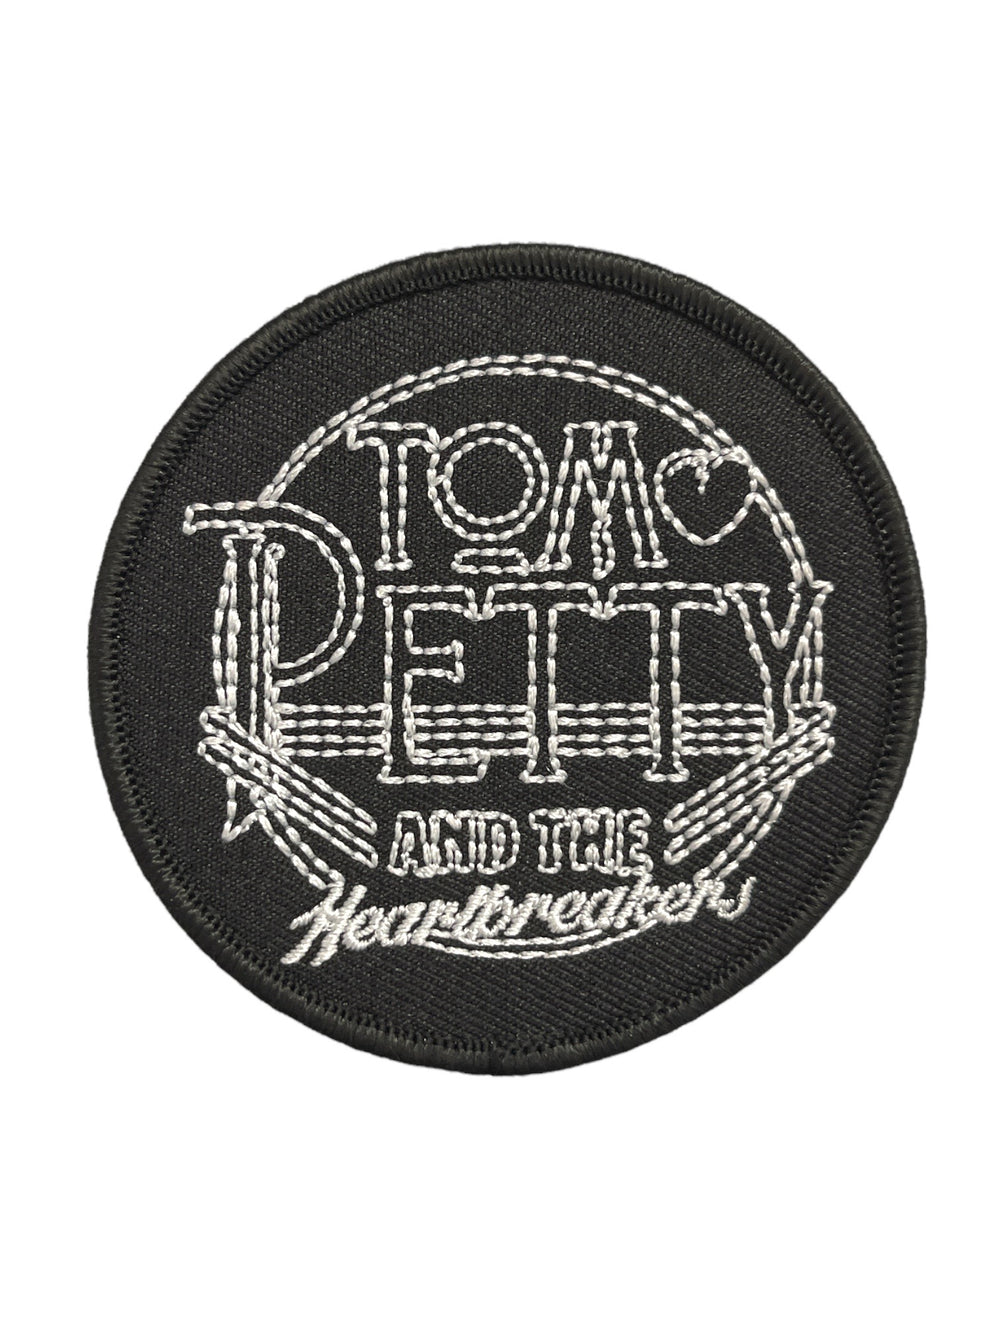 Tom Petty & The Heartbreakers Logo Official Woven Patch Brand New